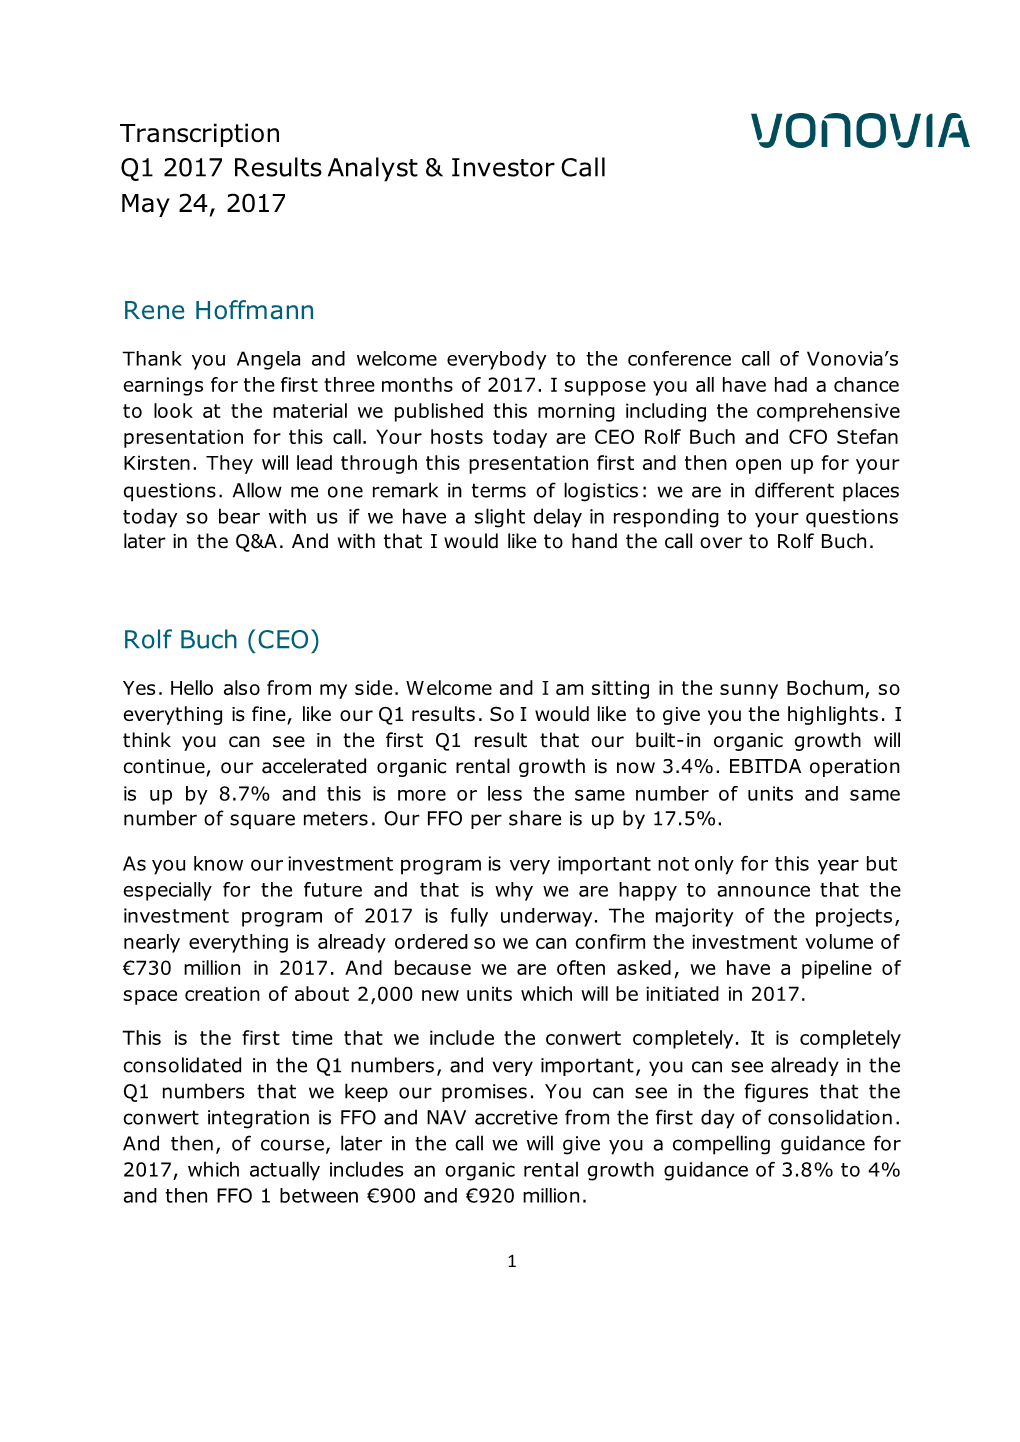 Transcription Q1 2017 Results Analyst & Investor Call May 24, 2017 Rene Hoffmann Rolf Buch (CEO)